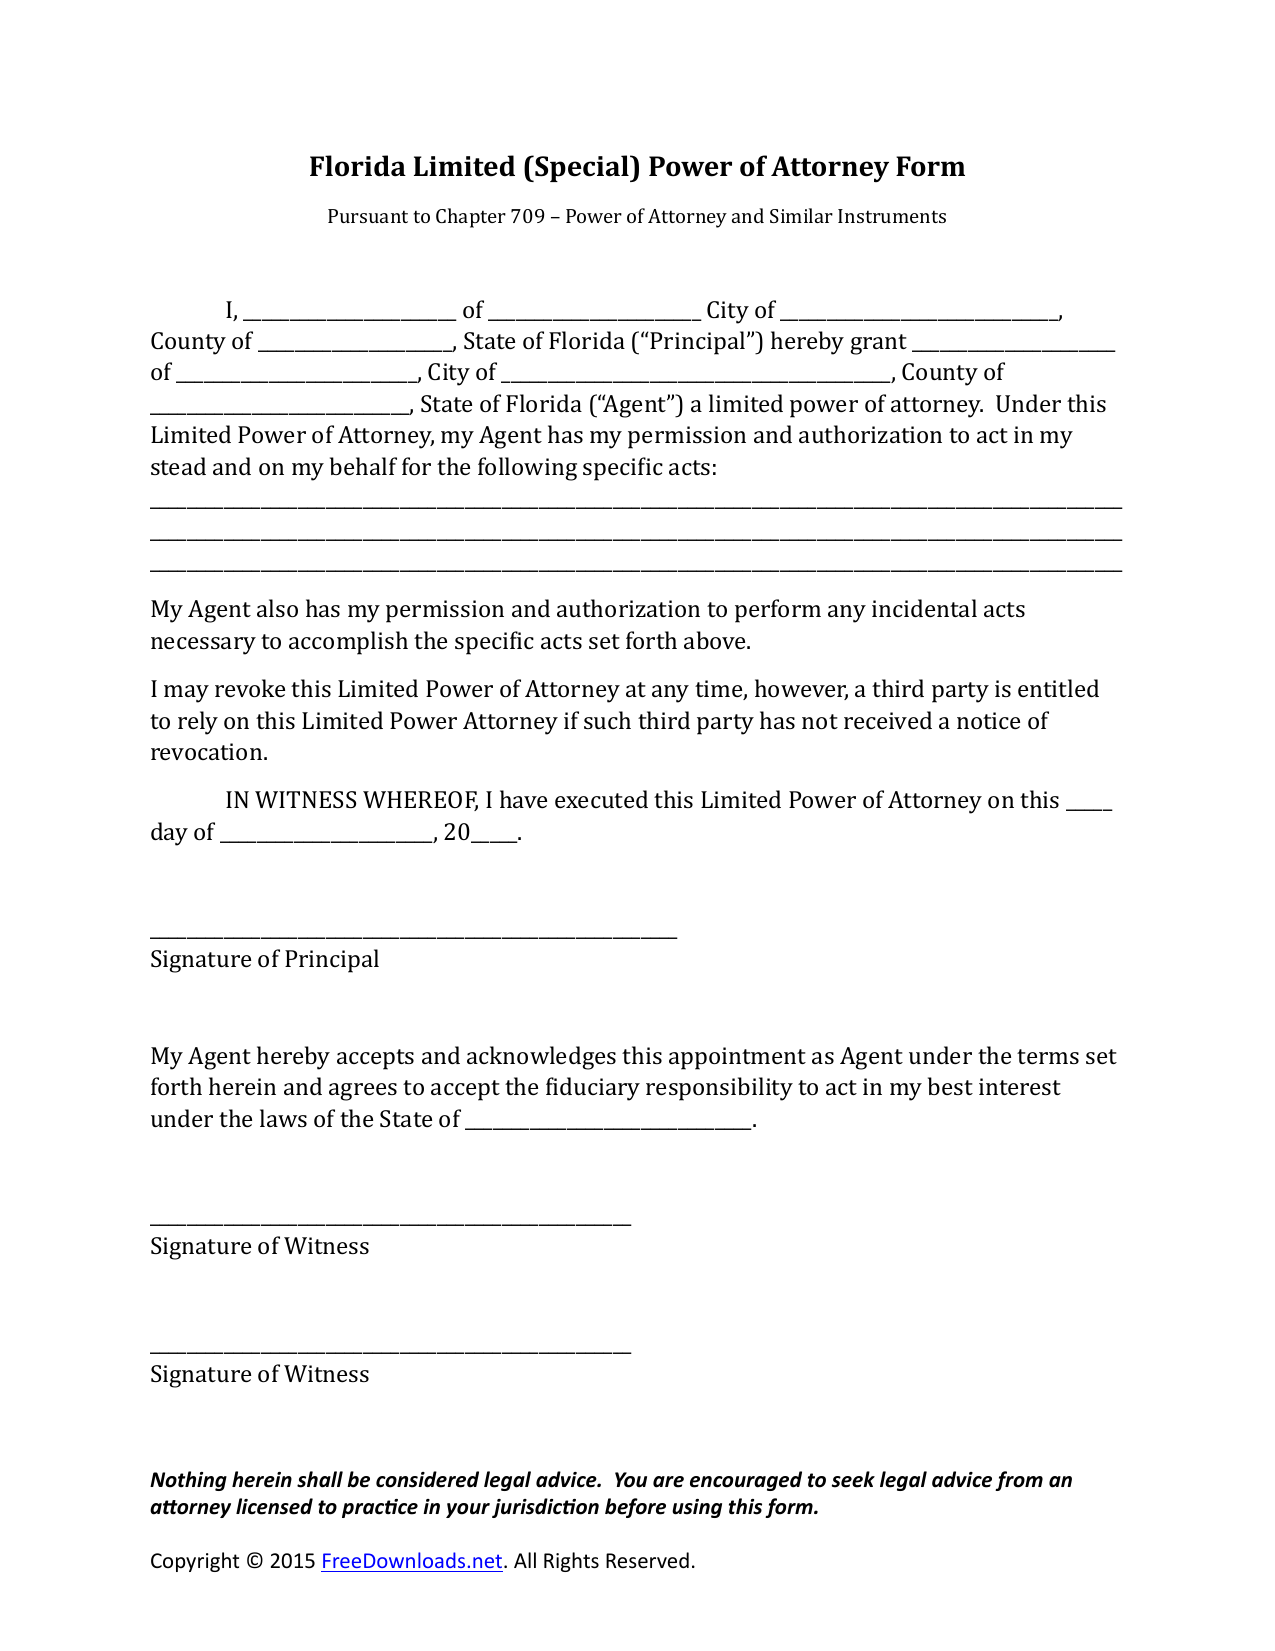 Download Florida Special Limited Power Of Attorney Form 